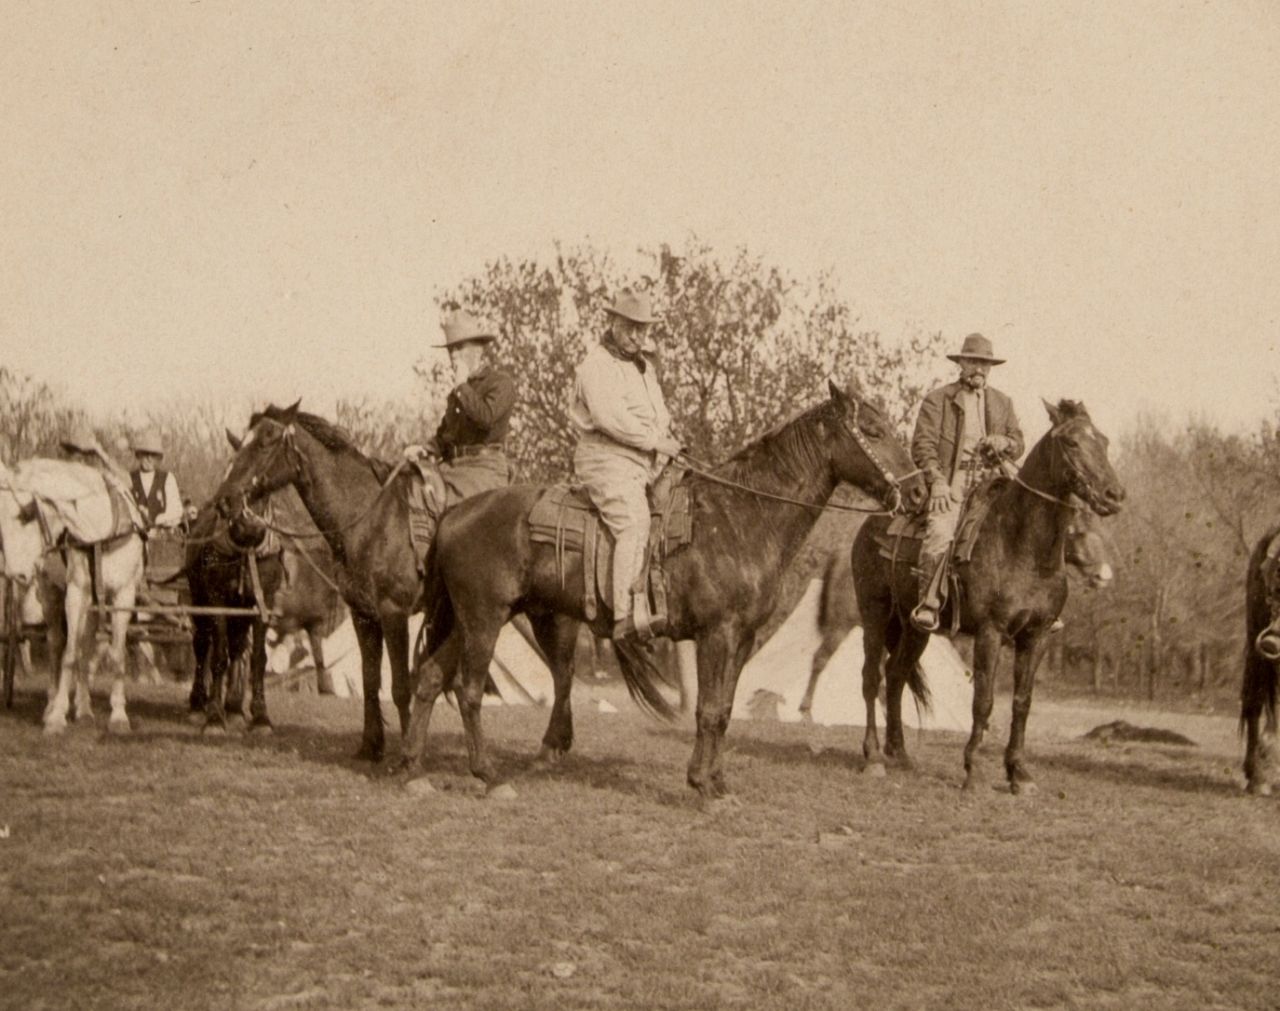 Waggoner Ranch has a rich history. Among its more illustrious visitors was the former American president Theodore Roosevelt (center).